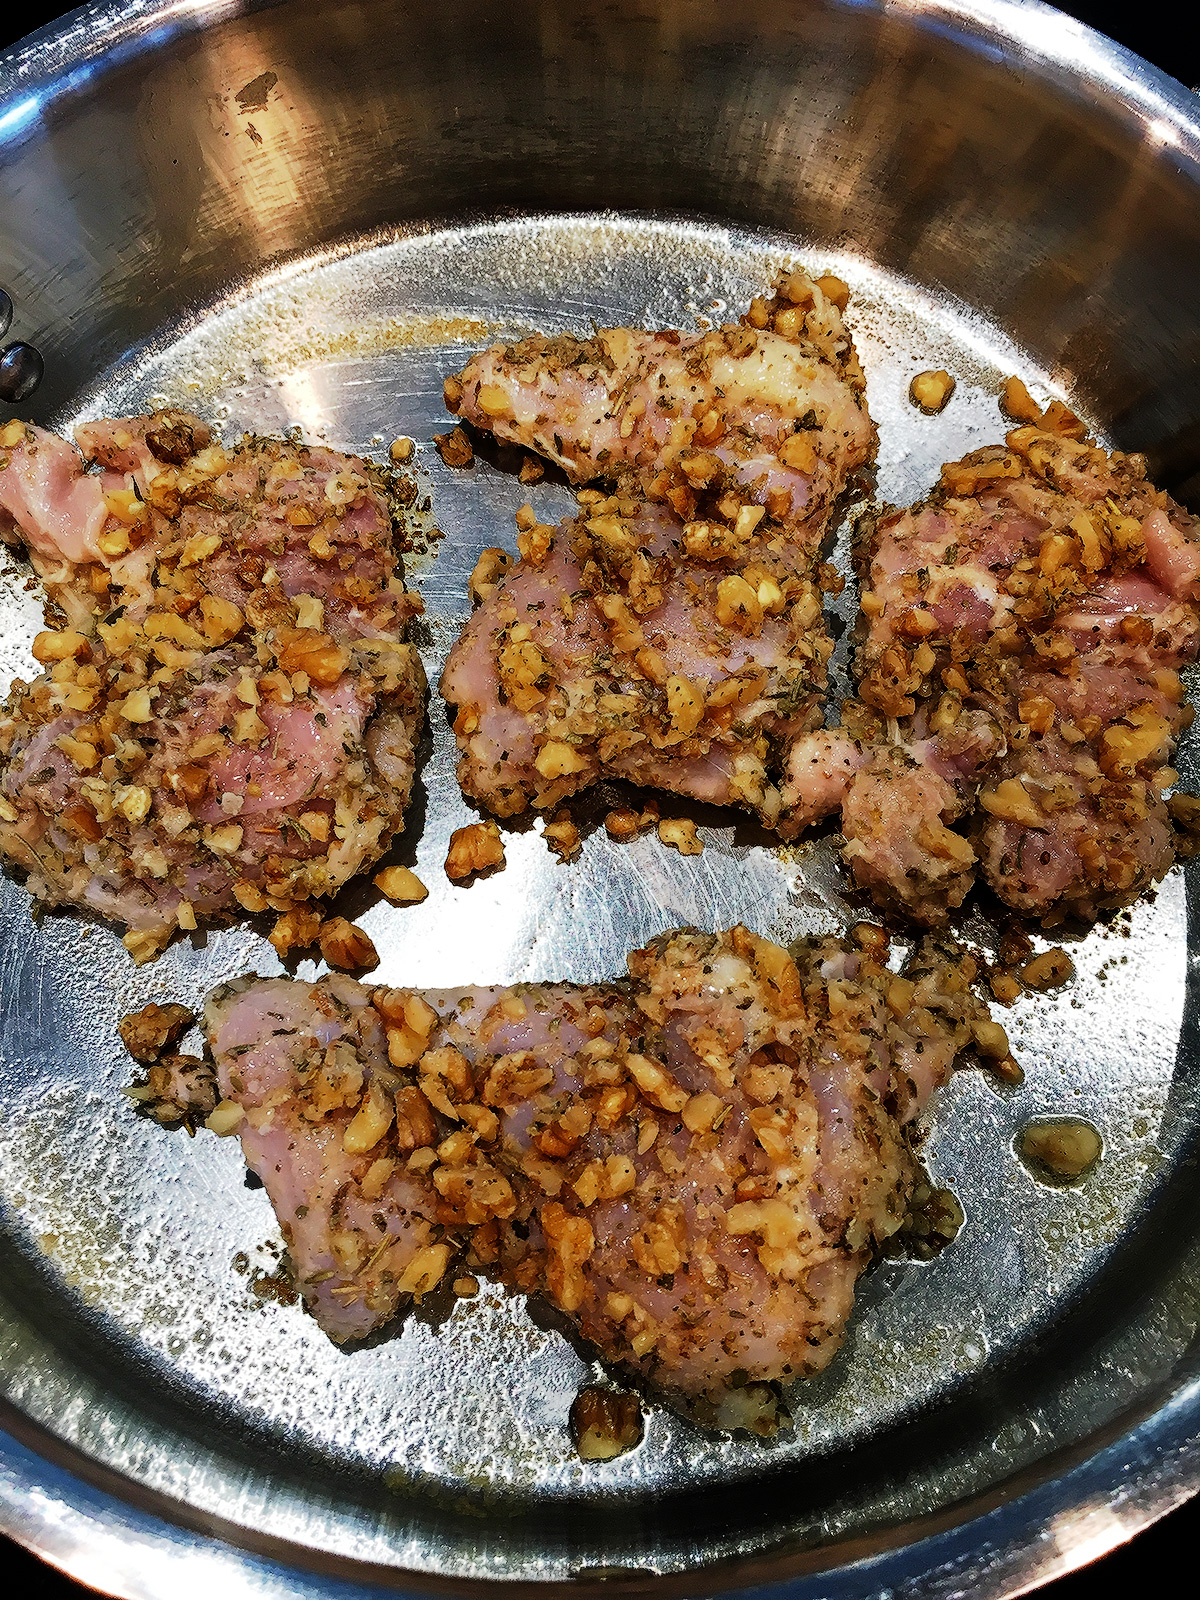 Cooking four chicken thighs with walnuts and herbs in a stainless steel skillet